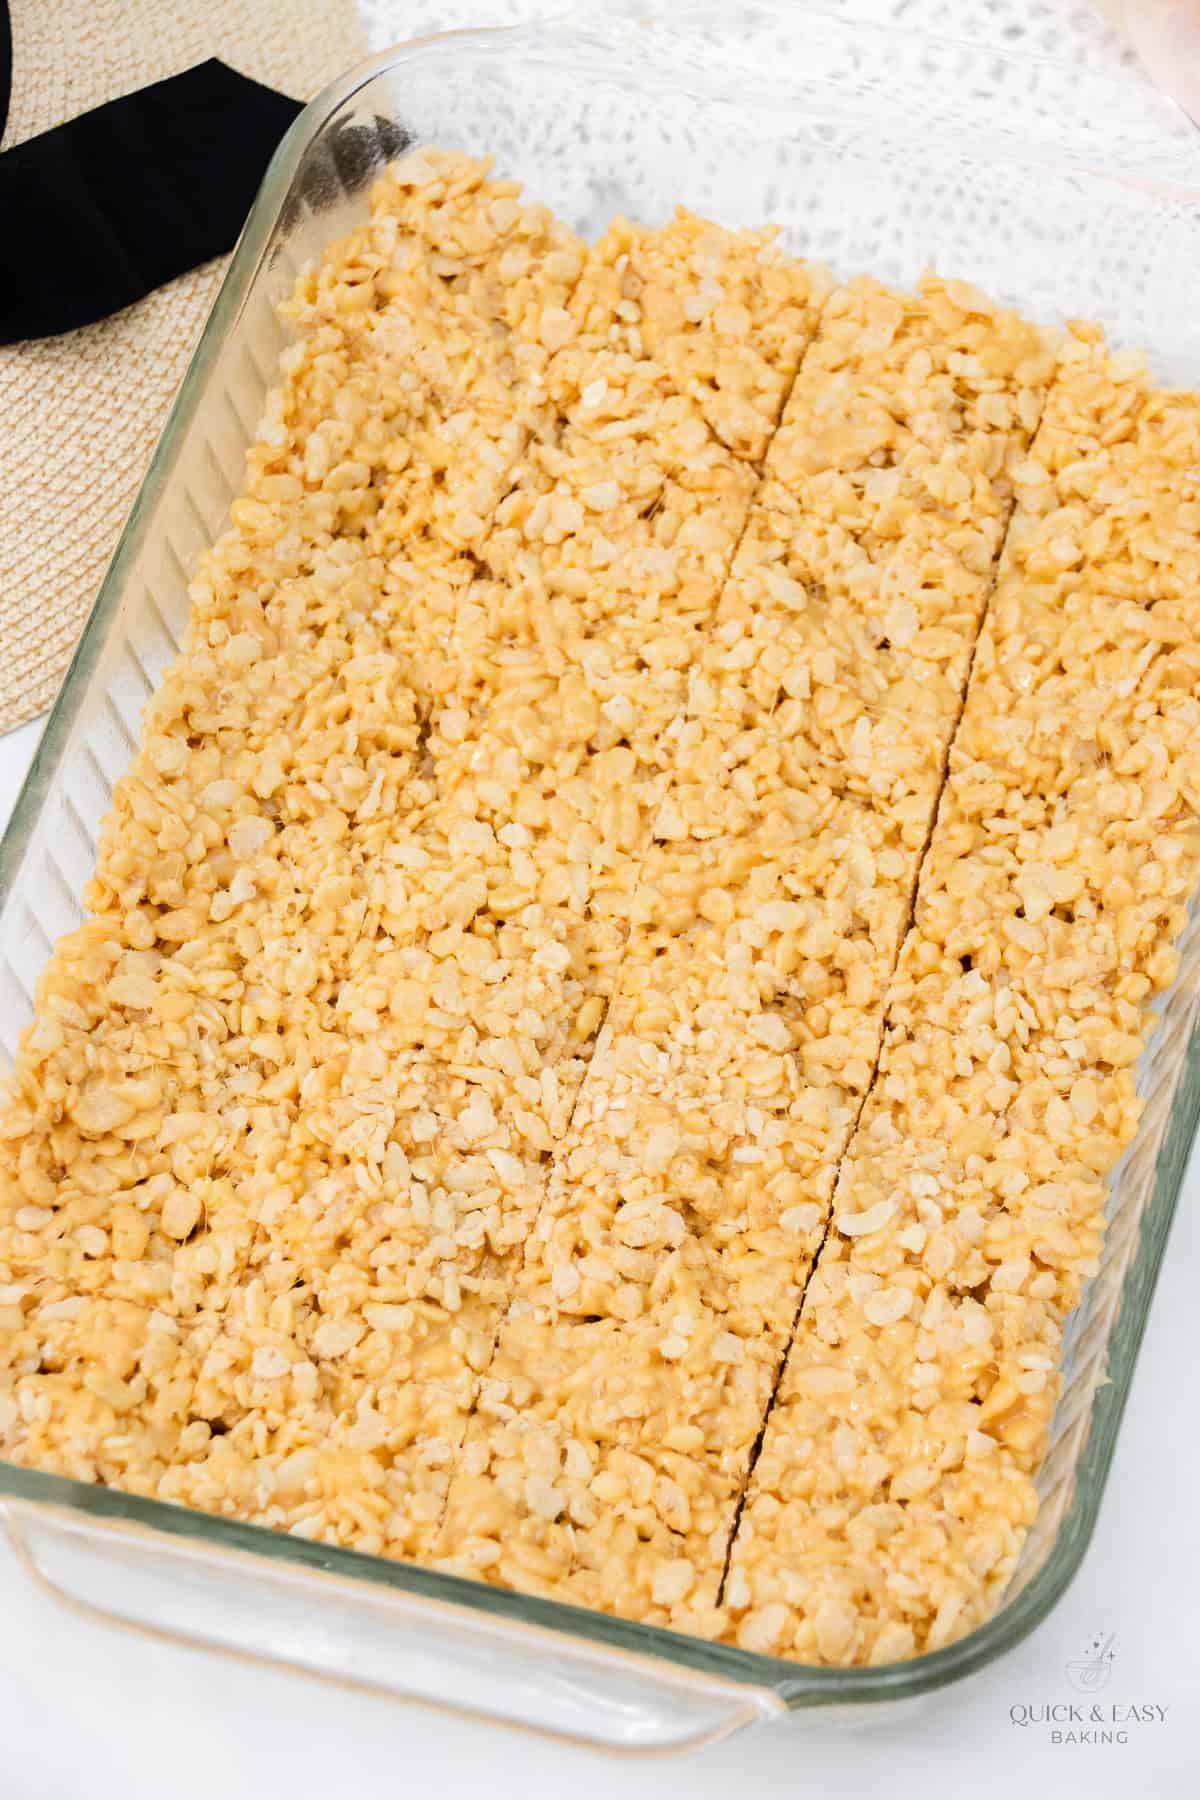 Peanut butter rice krispie treats cut into squares in a baking dish.